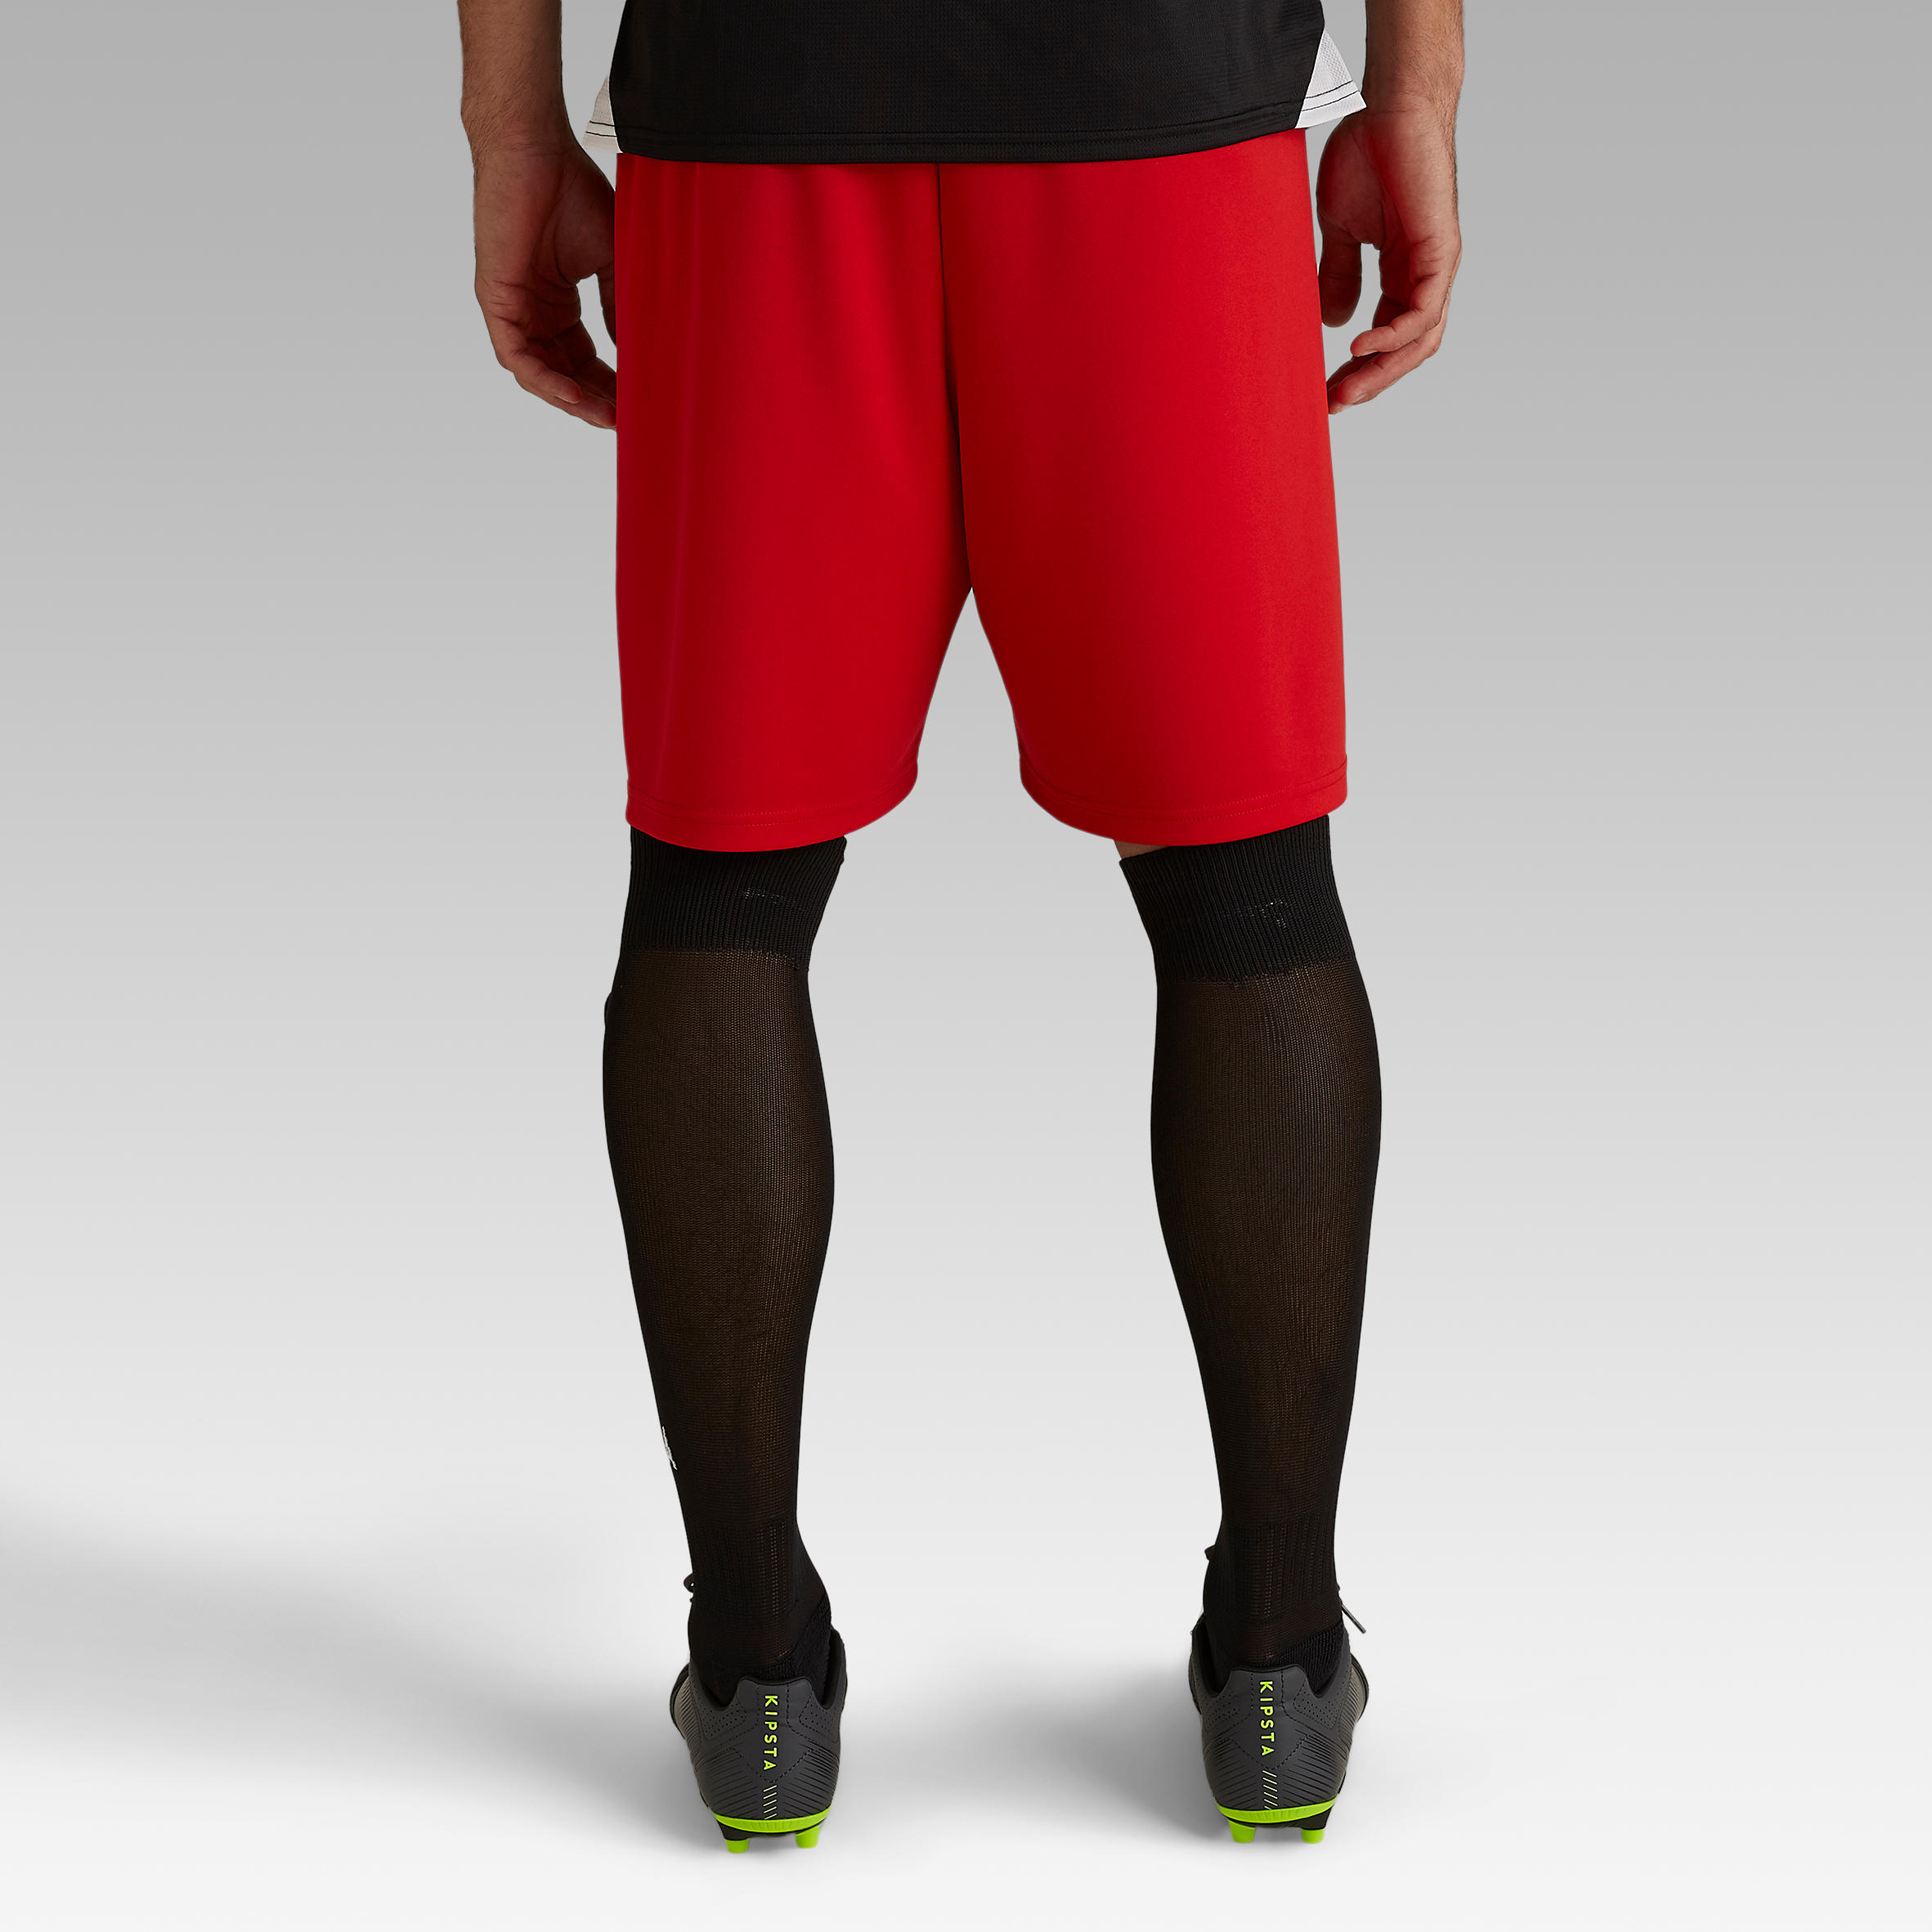 F100 Adult Football Shorts - Red 4/7